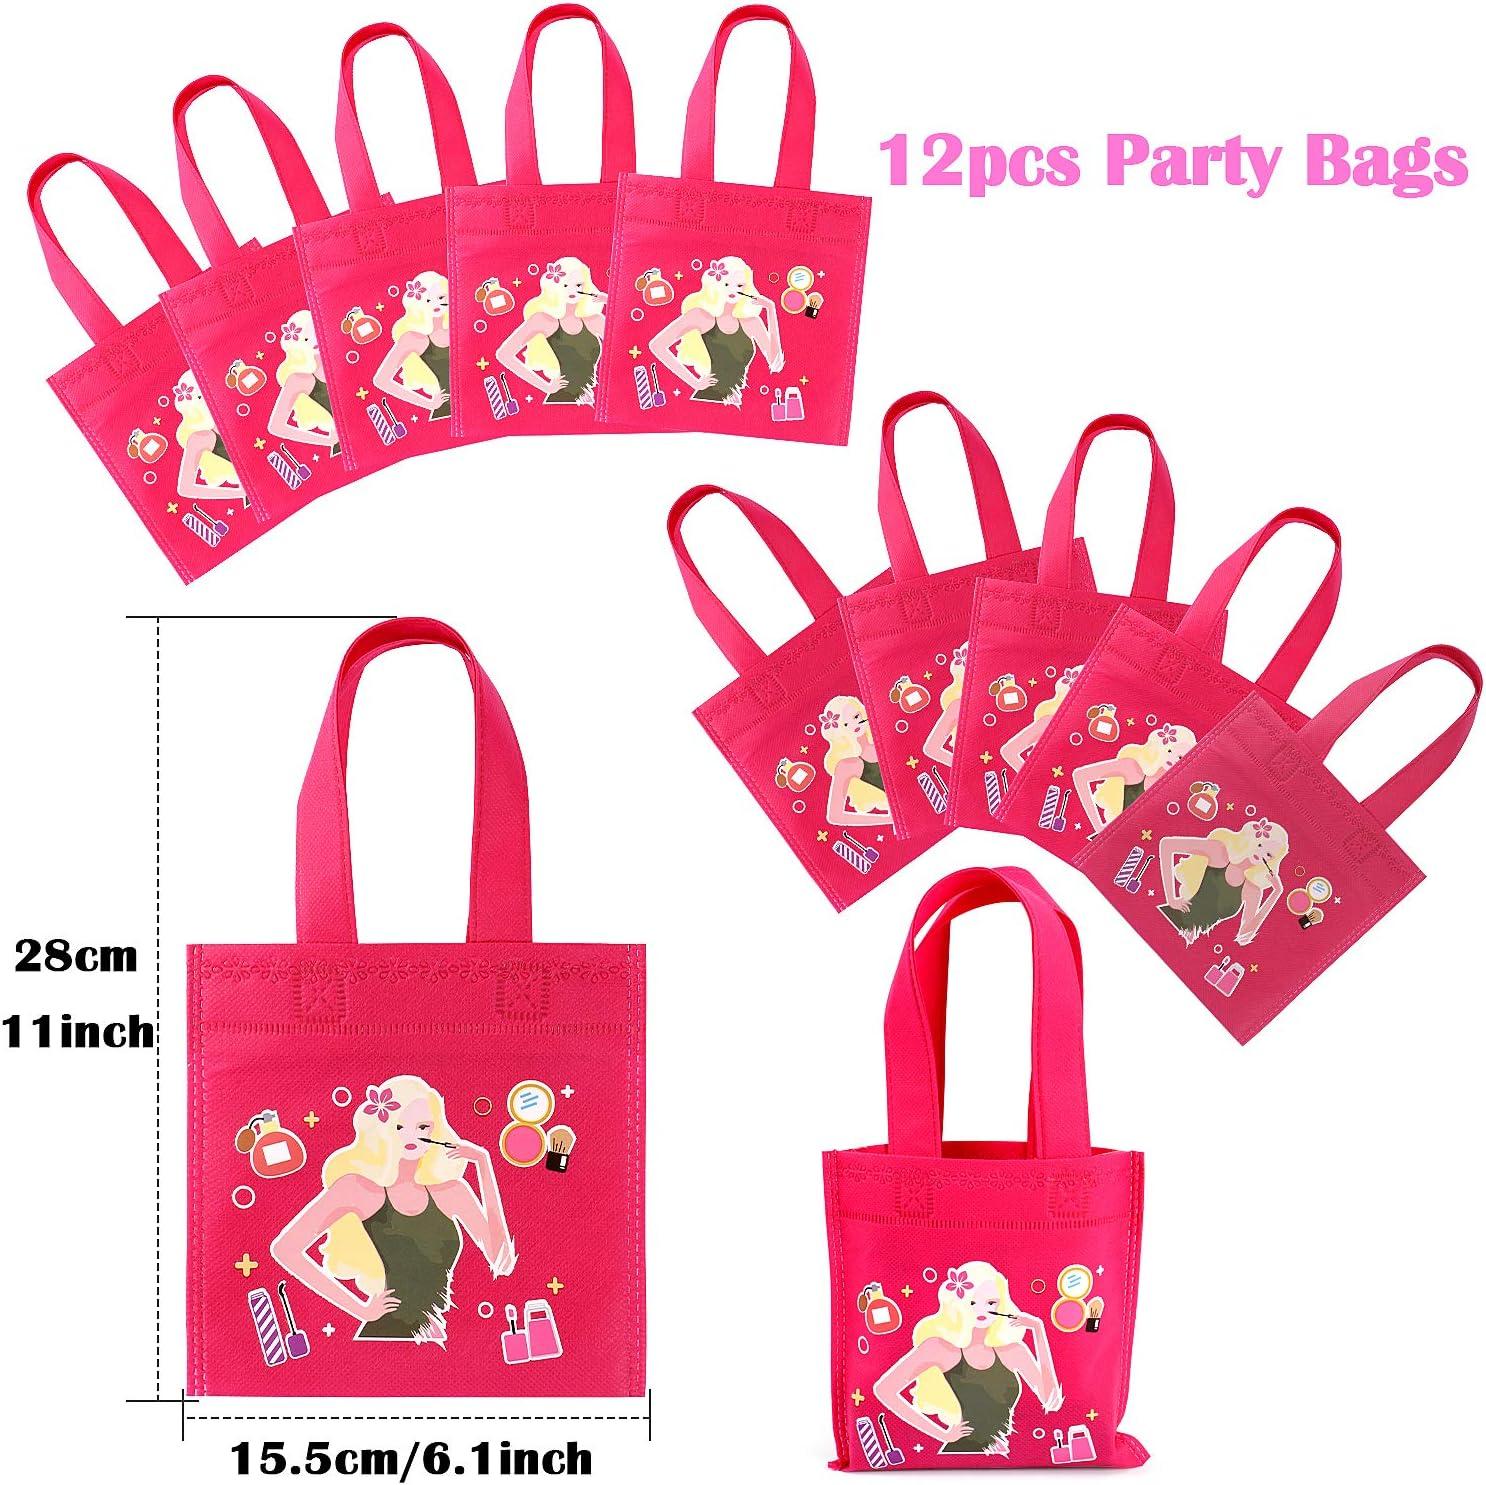 Tacobear Spa Party Supplies for Girls Multiple Spa Party Favors for Kids  with 12 Tote Bags 24 Emery Boards 12 Colored Hair Clip Braids 24 Toe  Separators 12 Pink Spa Masks 12 Unicorn Nail Decal Sets